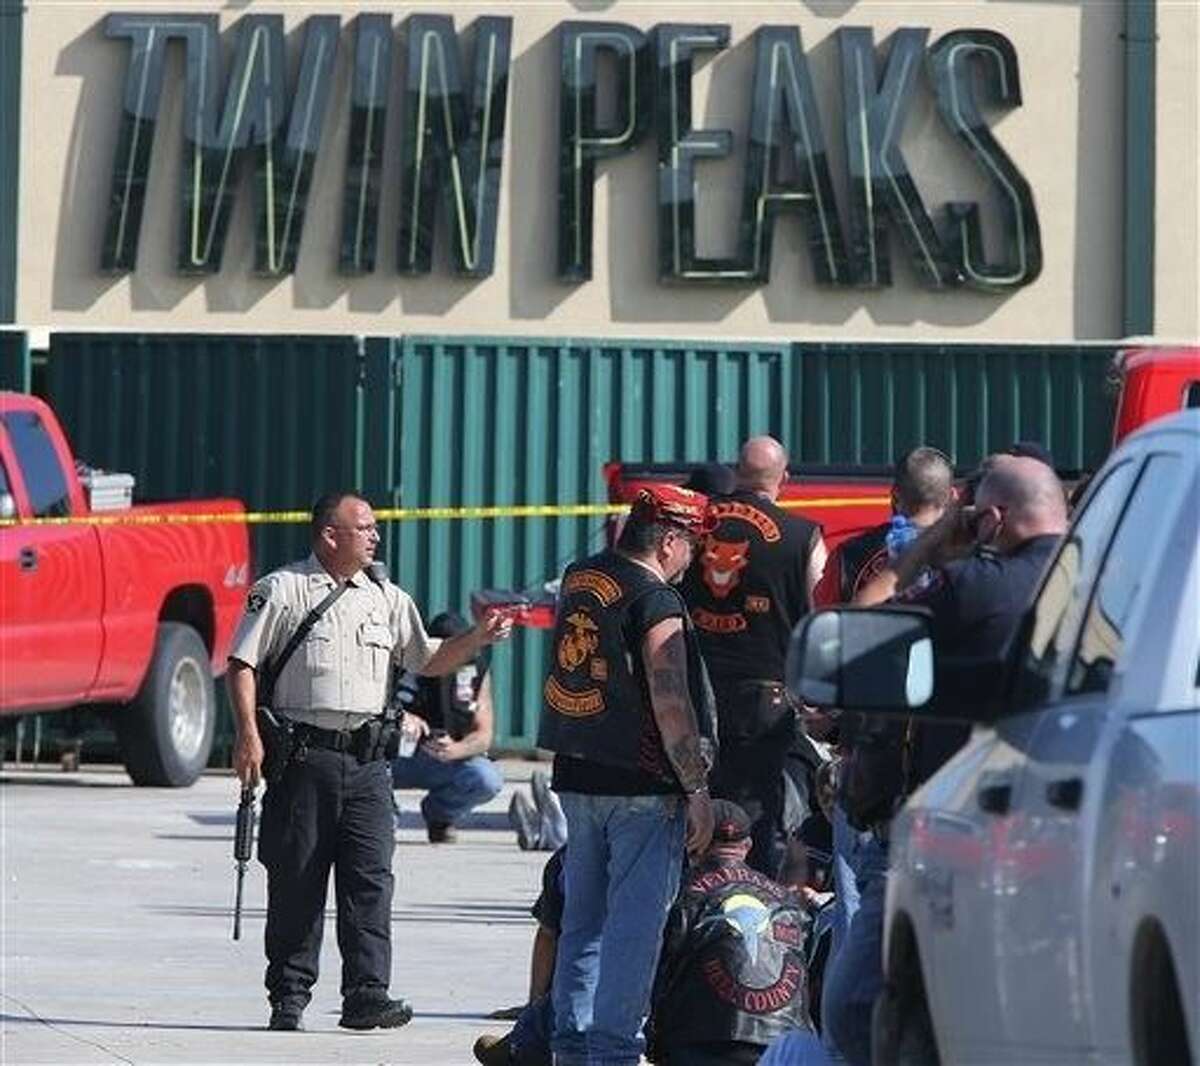 Police shot bikers in the deadly shootout that erupted last spring outside a Texas restaurant, though it remains unclear if their bullets caused any of the nine fatalities, according to evidence reviewed by The Associated Press.